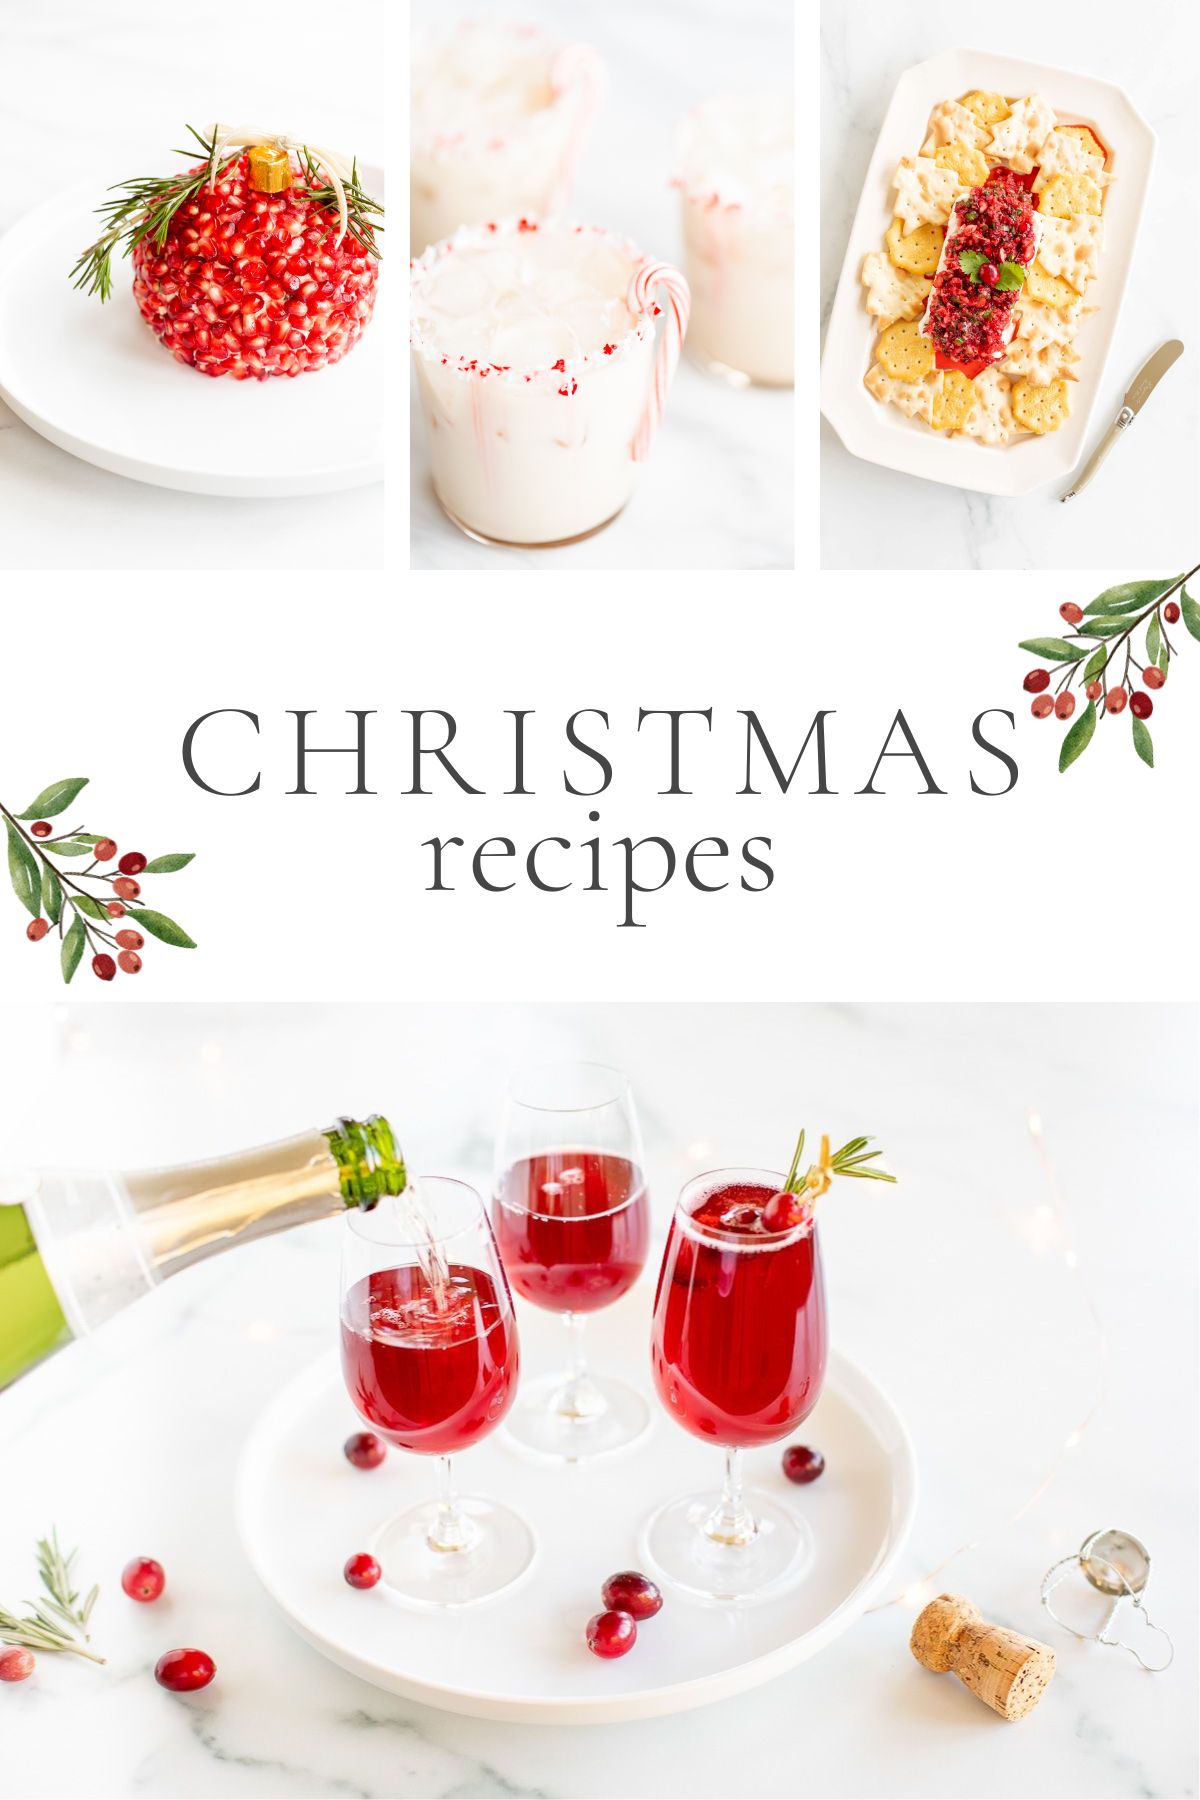 A graphic image featuring several Christmas recipes, headline in the center reads "Christmas Recipes".